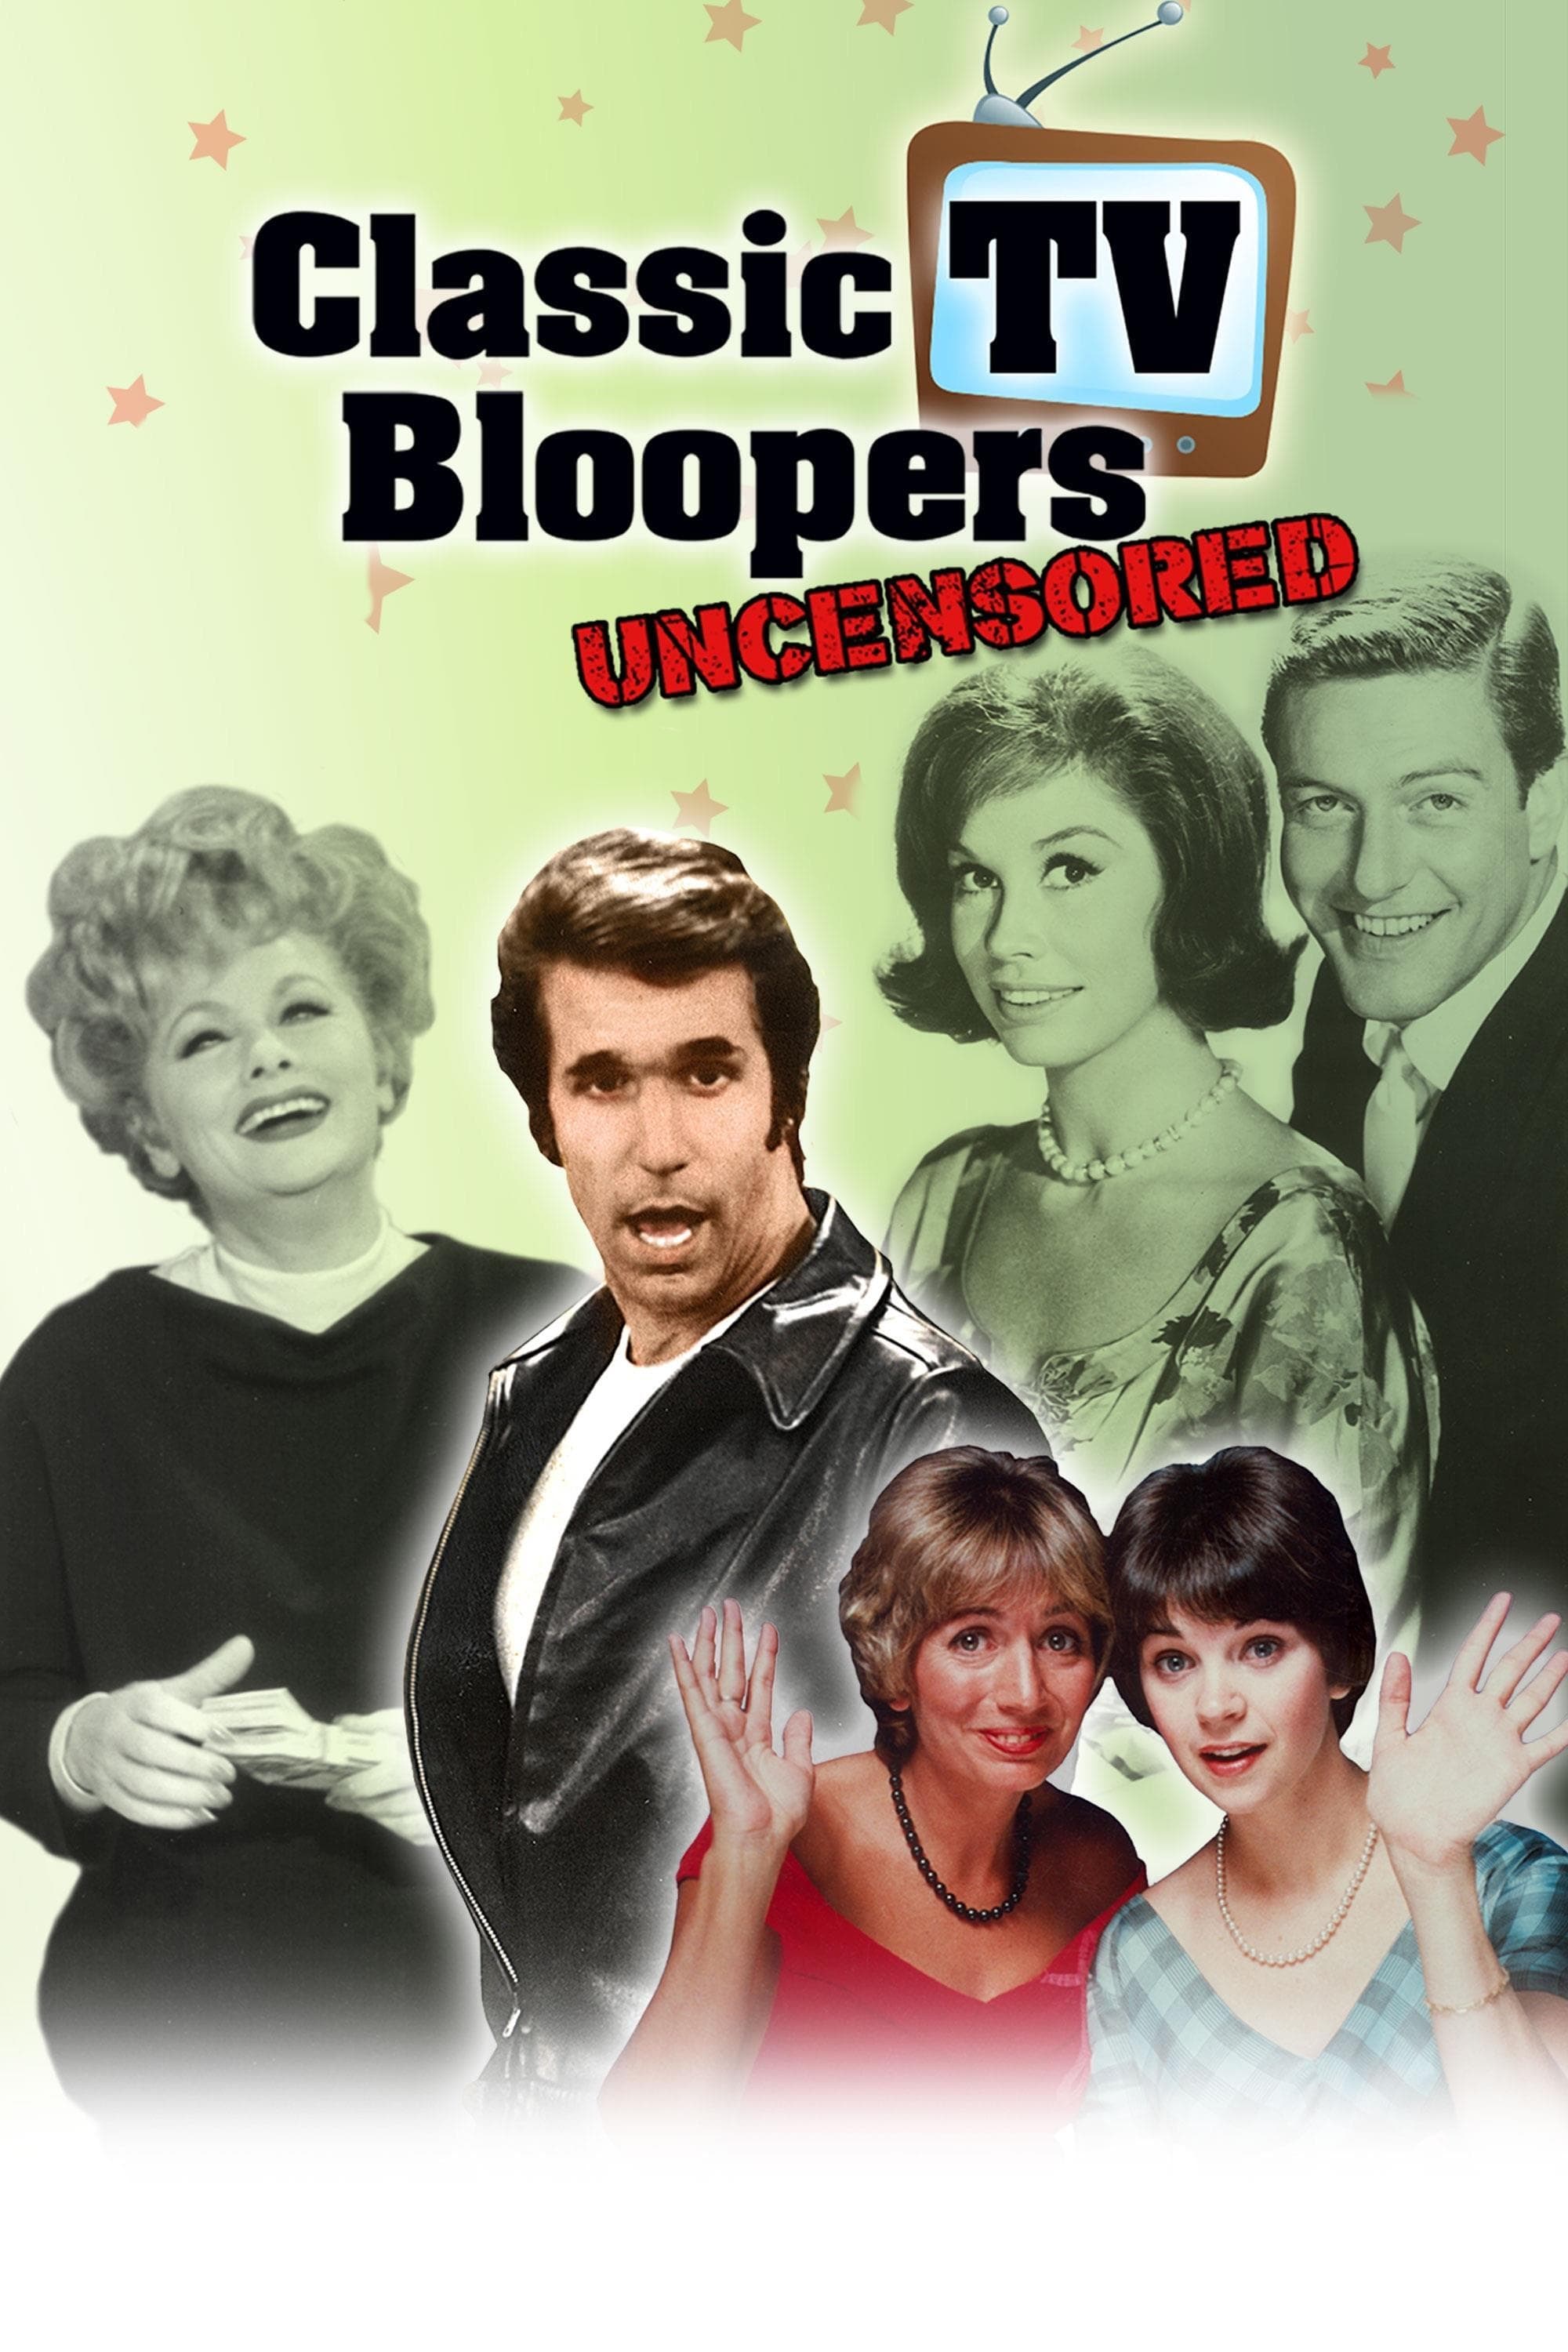 Classic TV Bloopers Uncensored (2011)